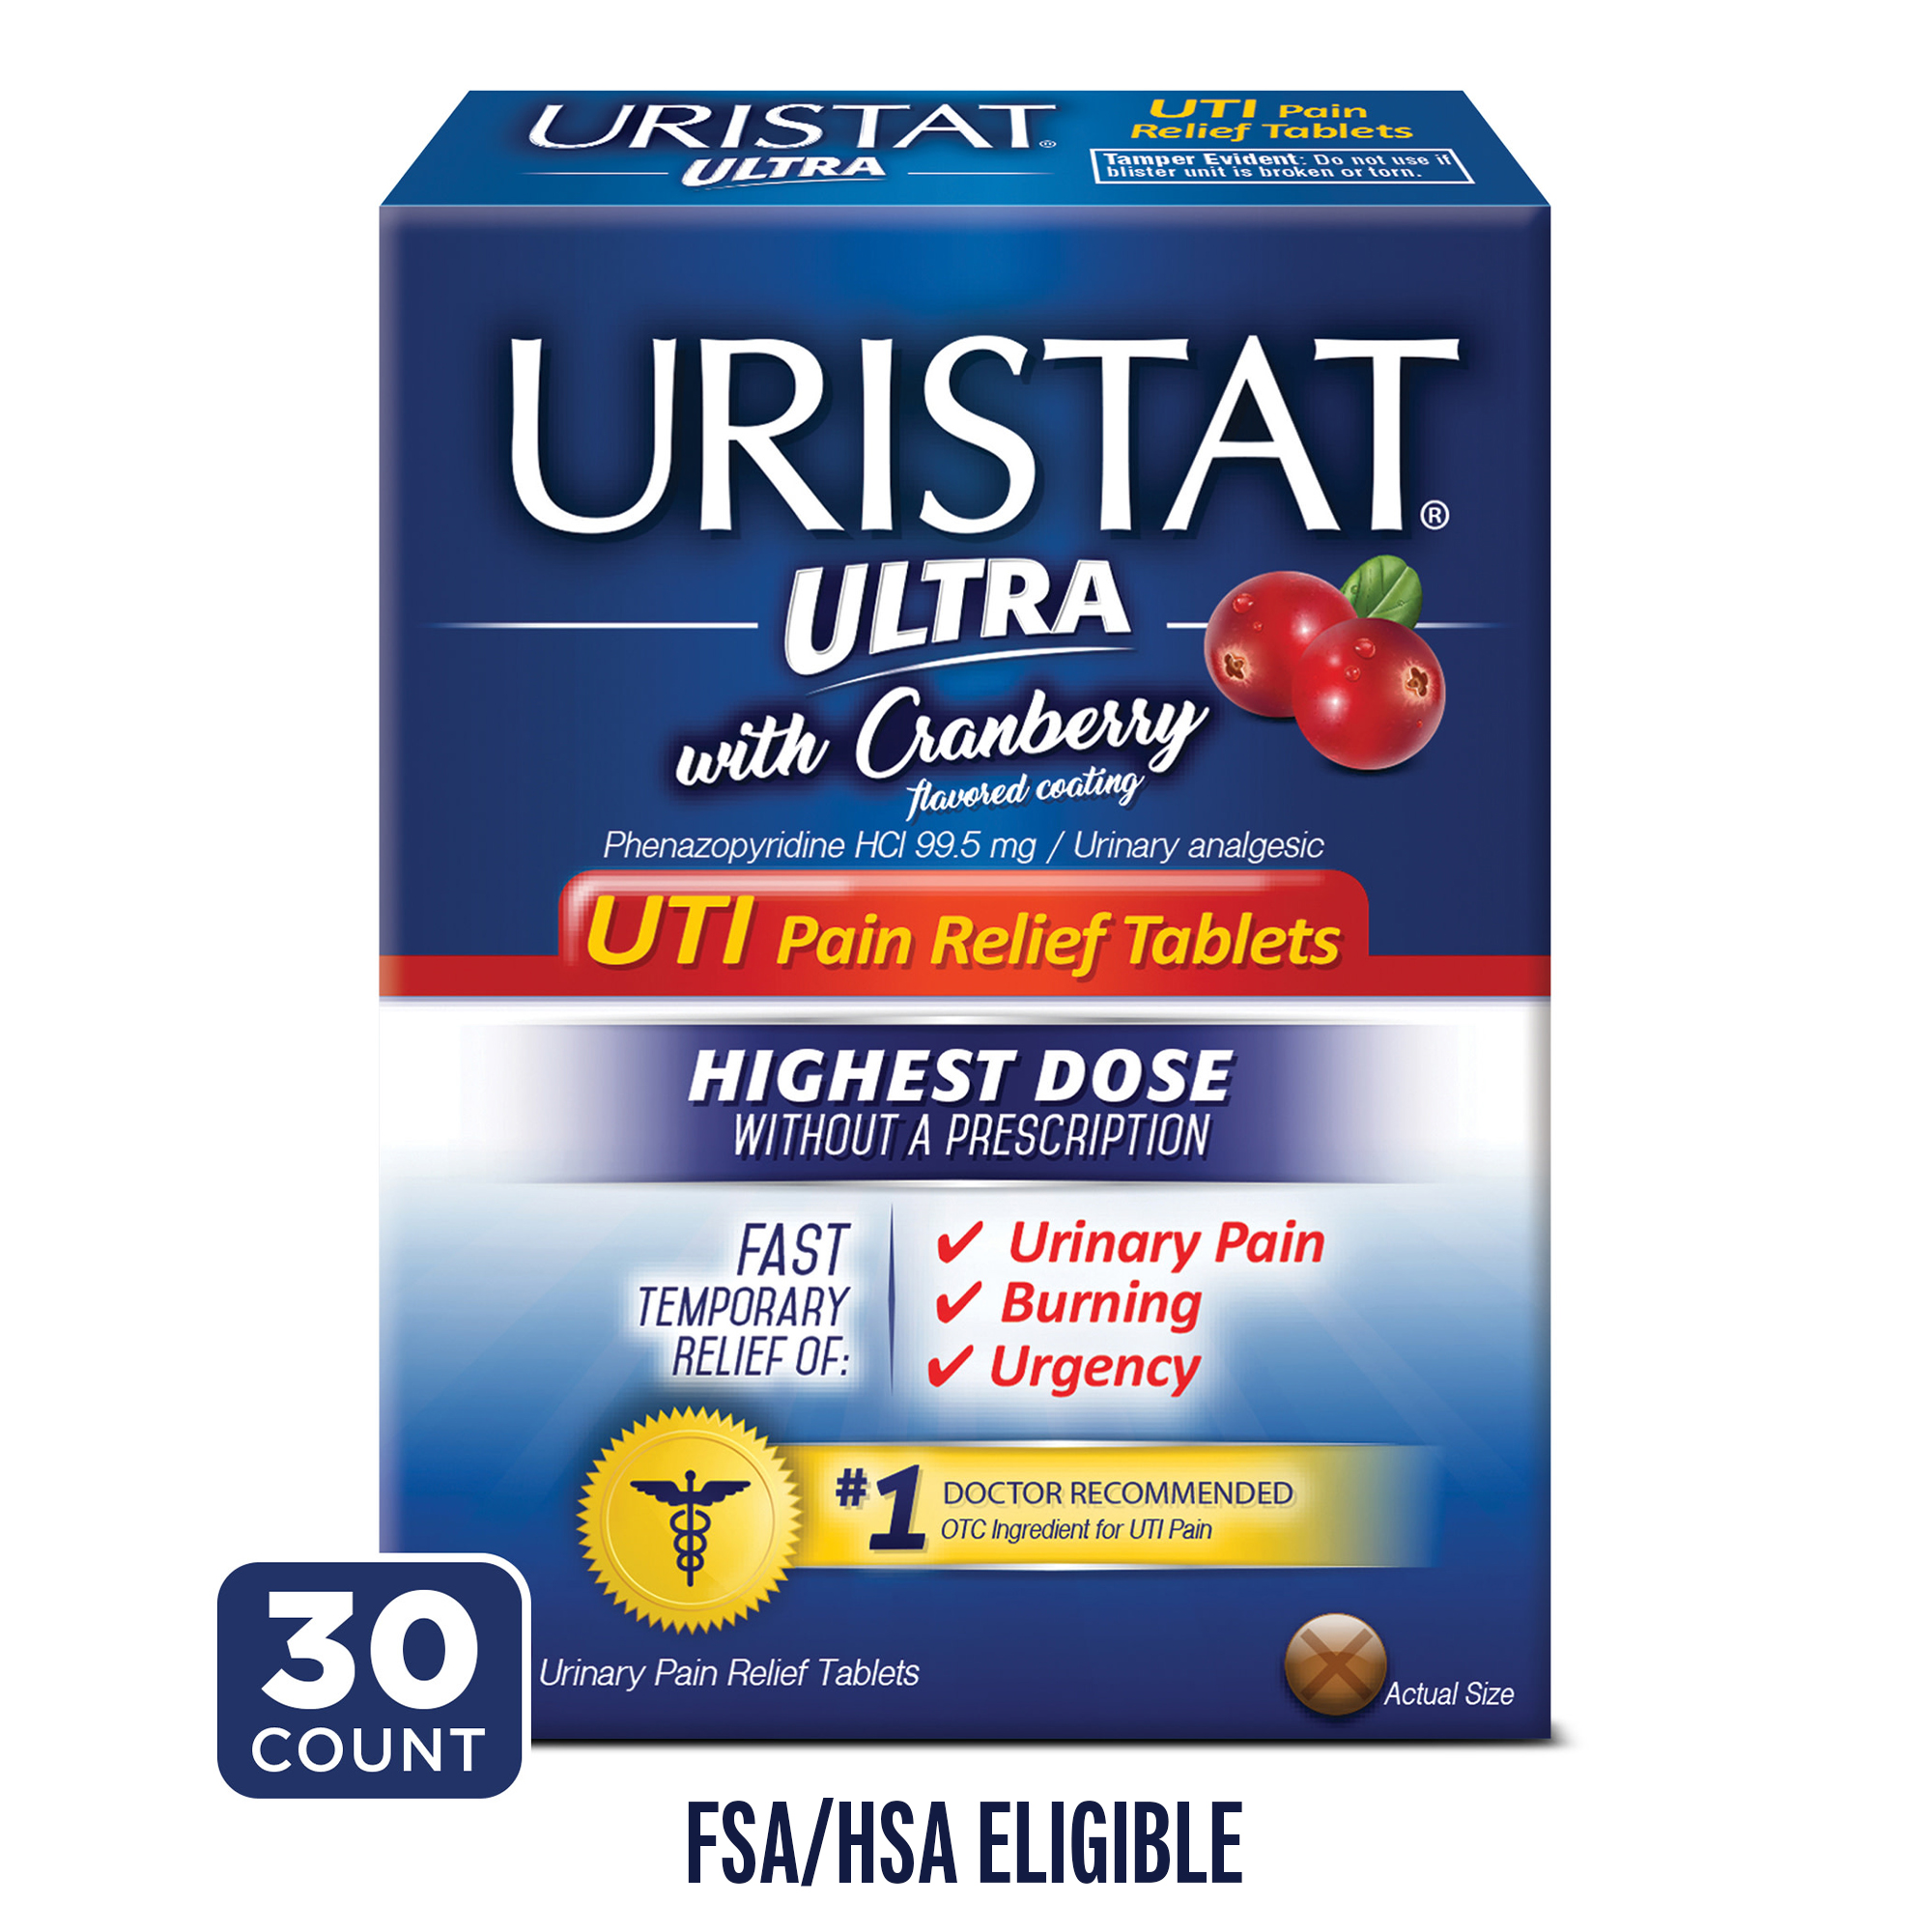 URISTAT Ultra UTI Pain Relief, Cranberry Flavored UTI Treatment Tablets, 30 Ct - image 1 of 14